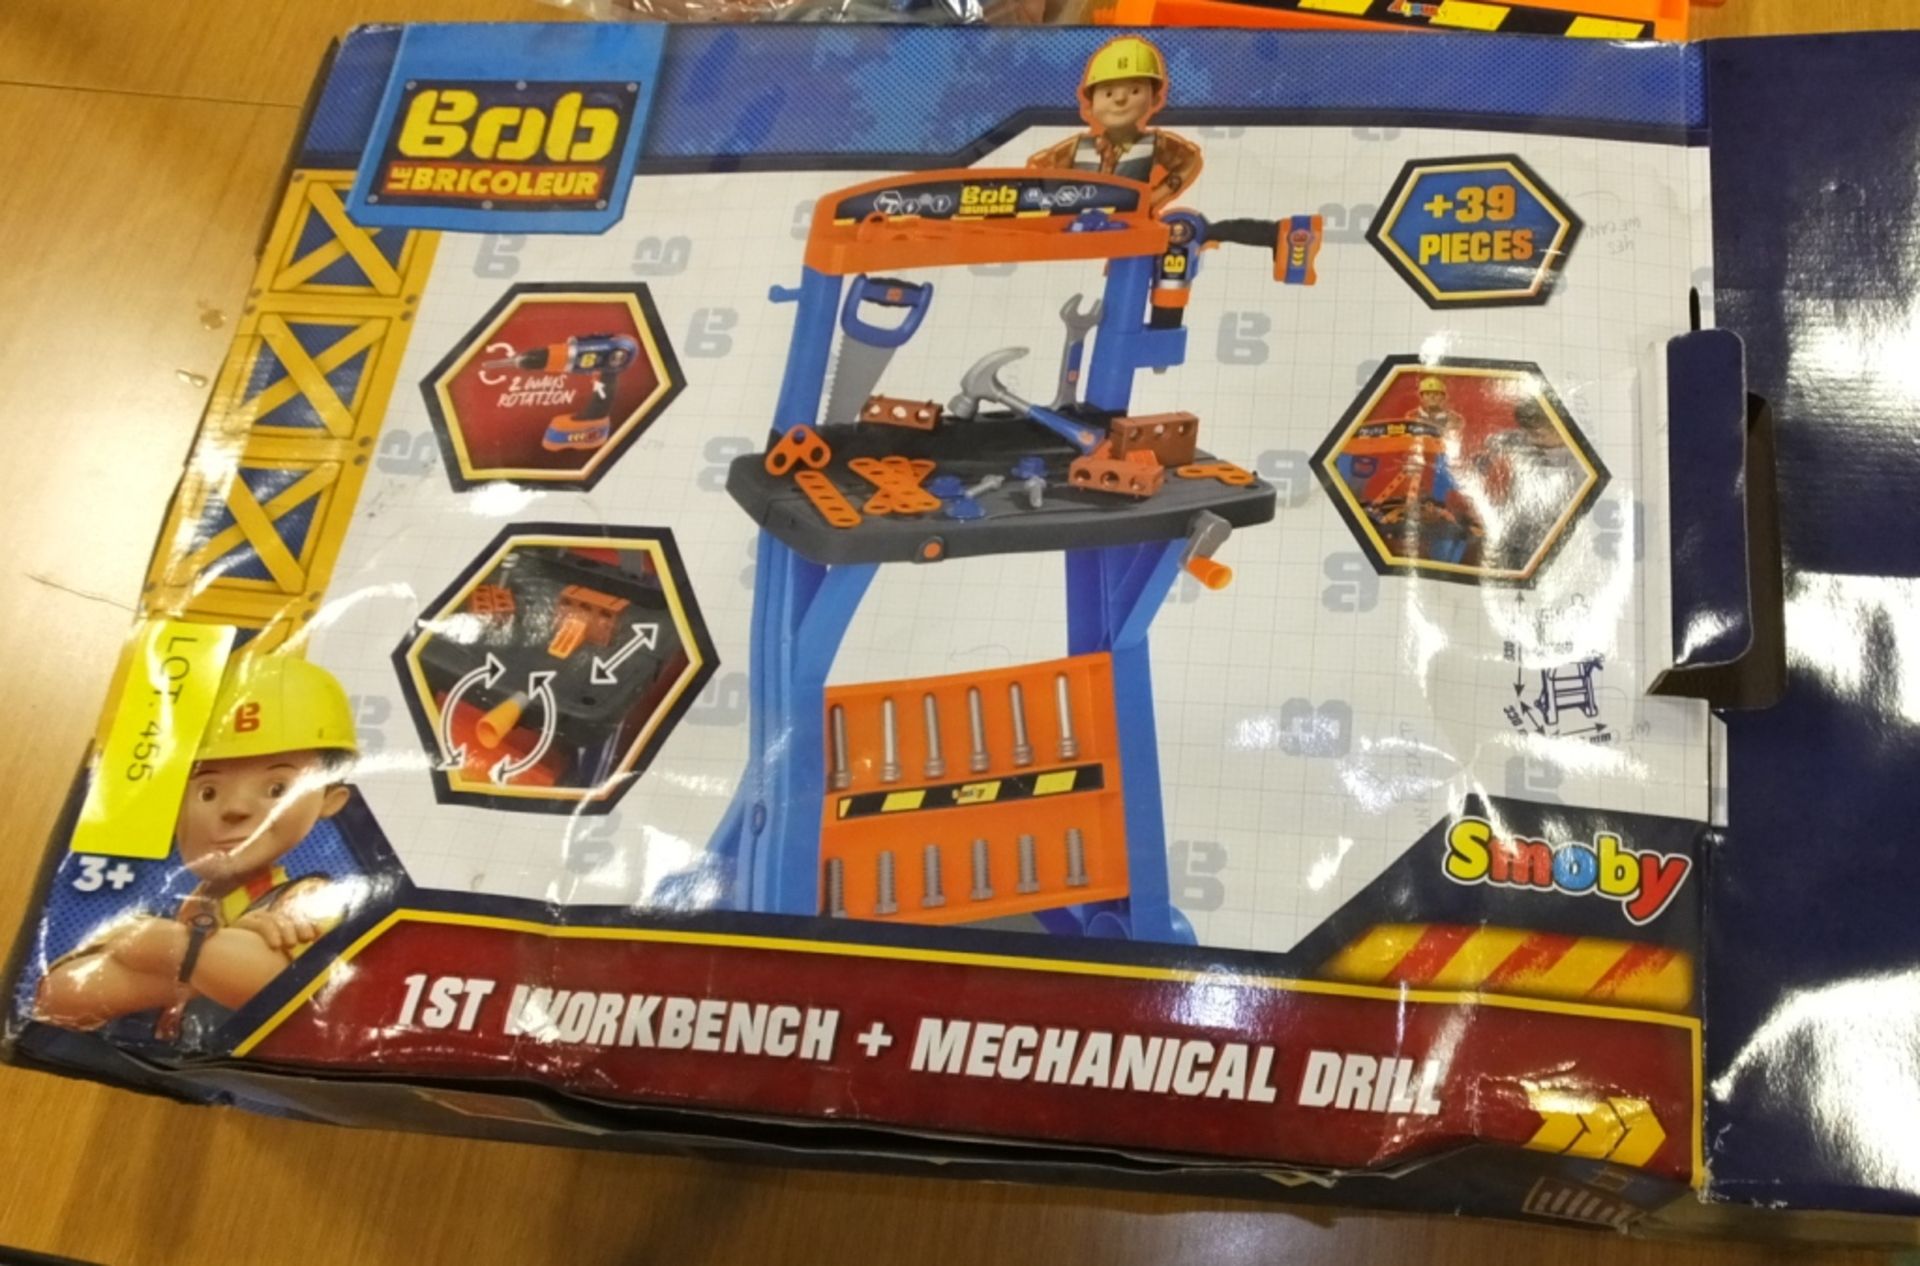 Bob the Builder 1st workbench toy - Image 6 of 6